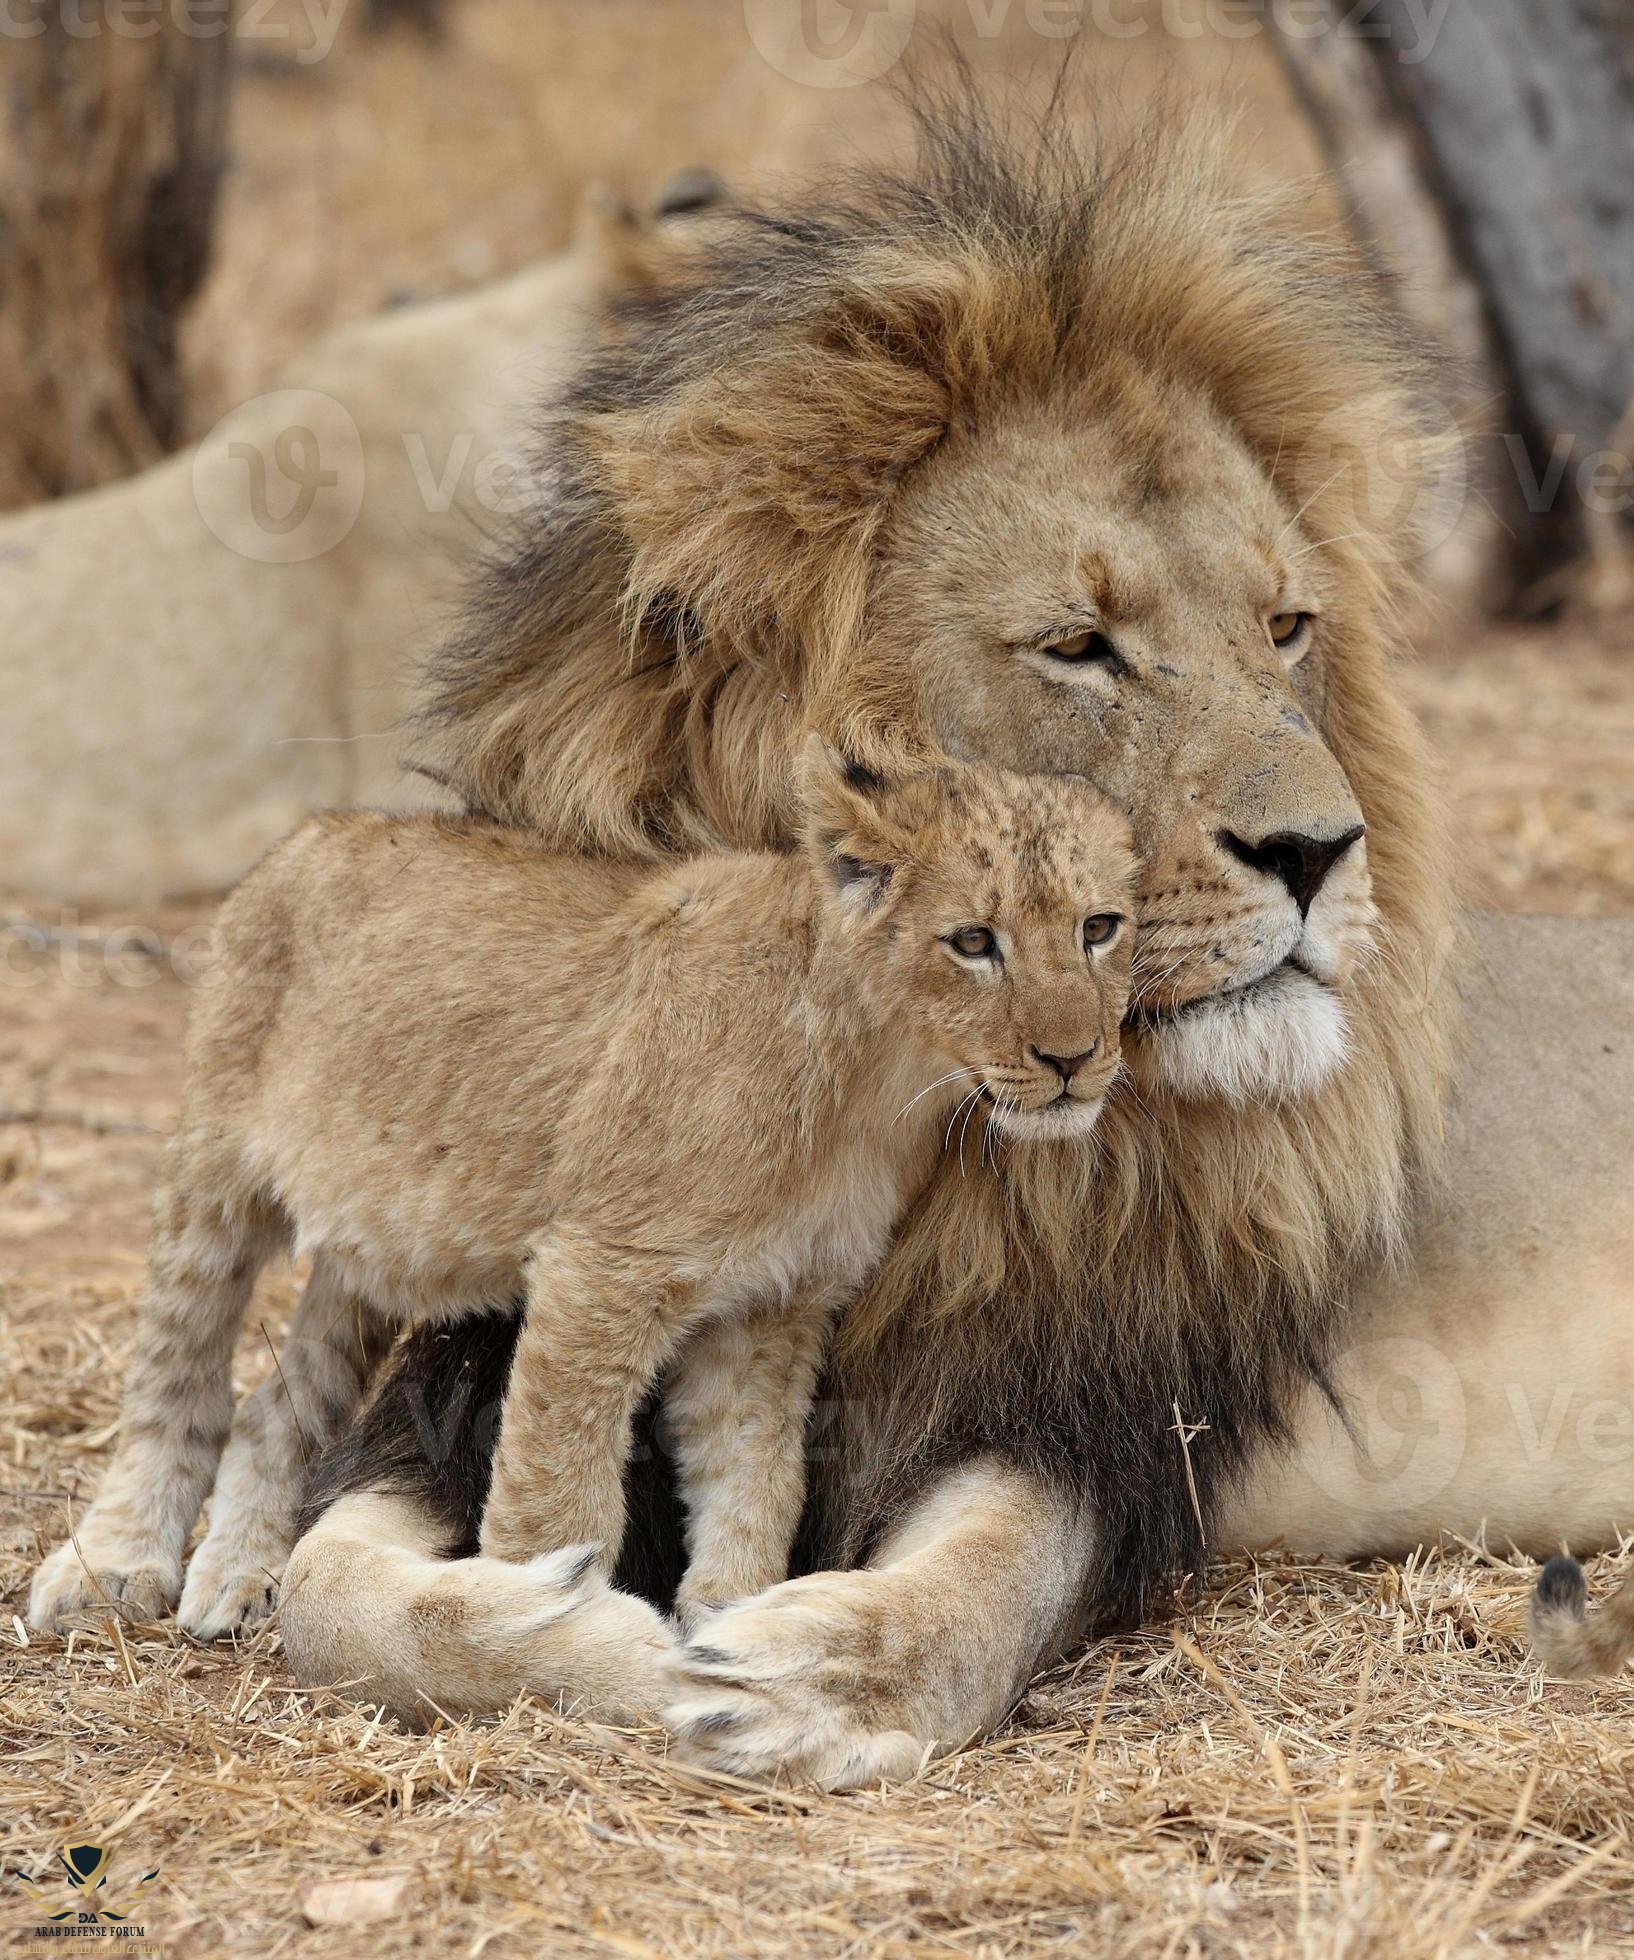 adult-with-baby-lion-cub-in-south-africa-photo.jpg